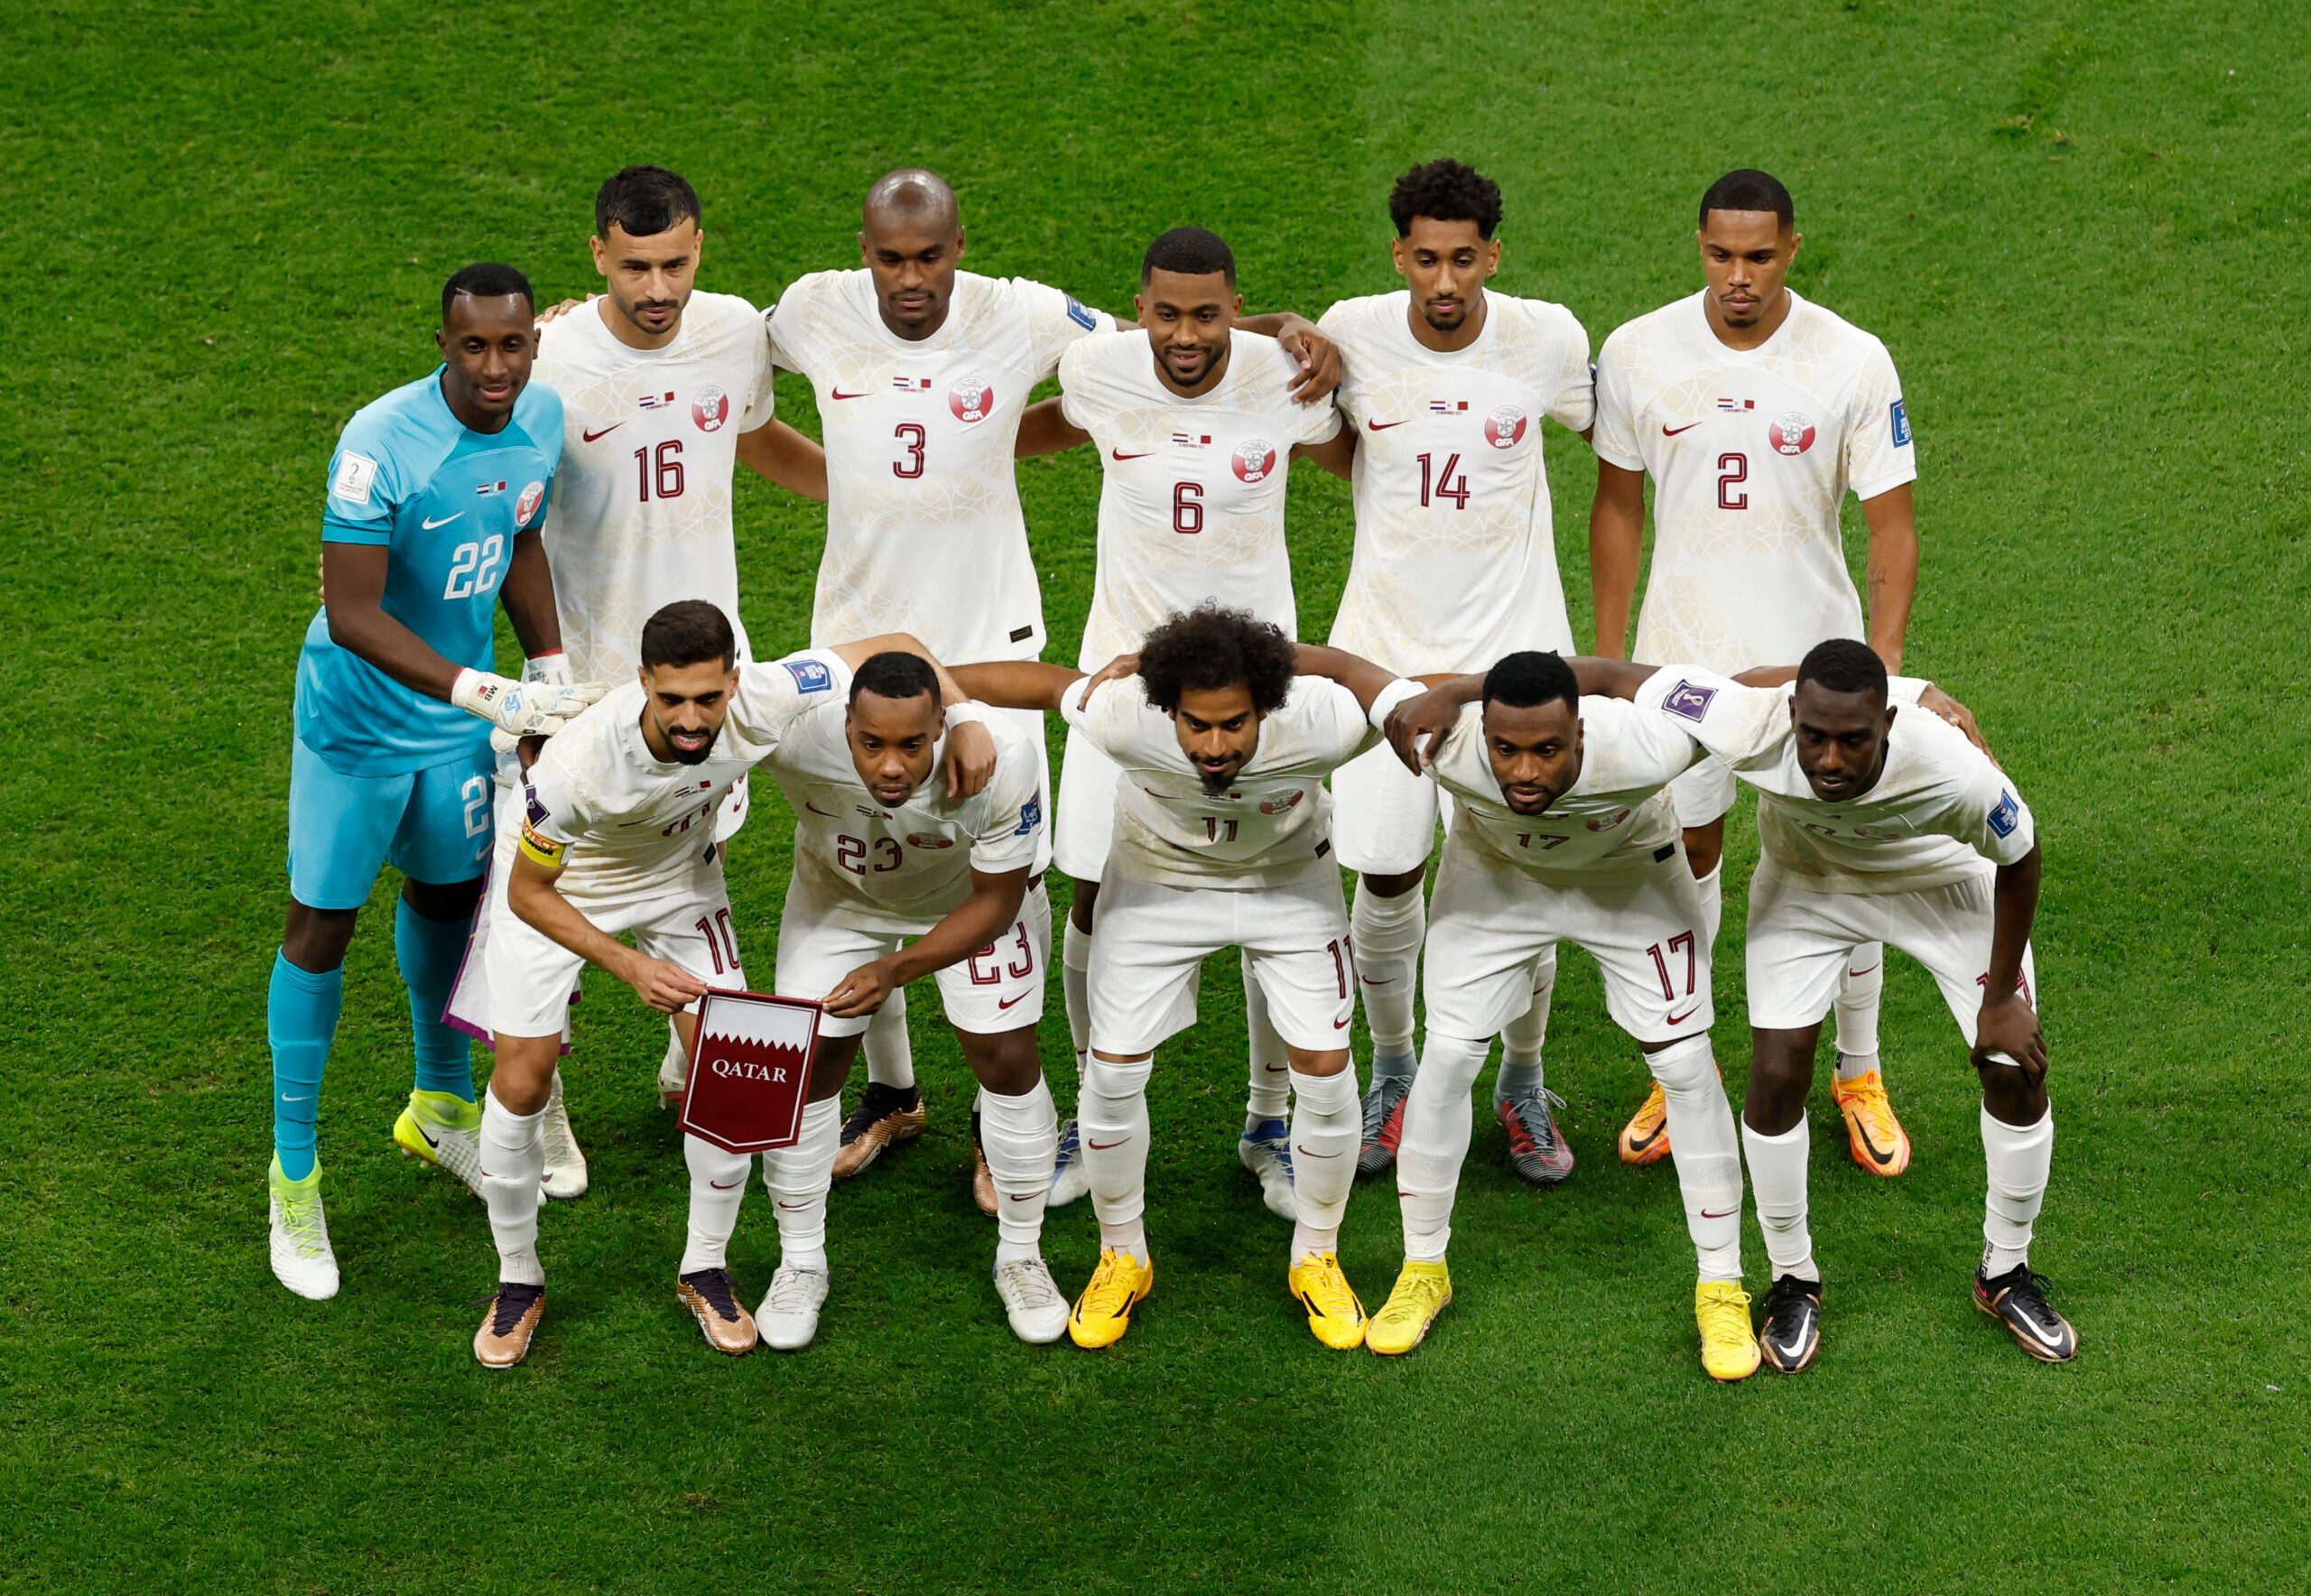 Qatar hope that their World Cup team will inspire the next generation of sports stars